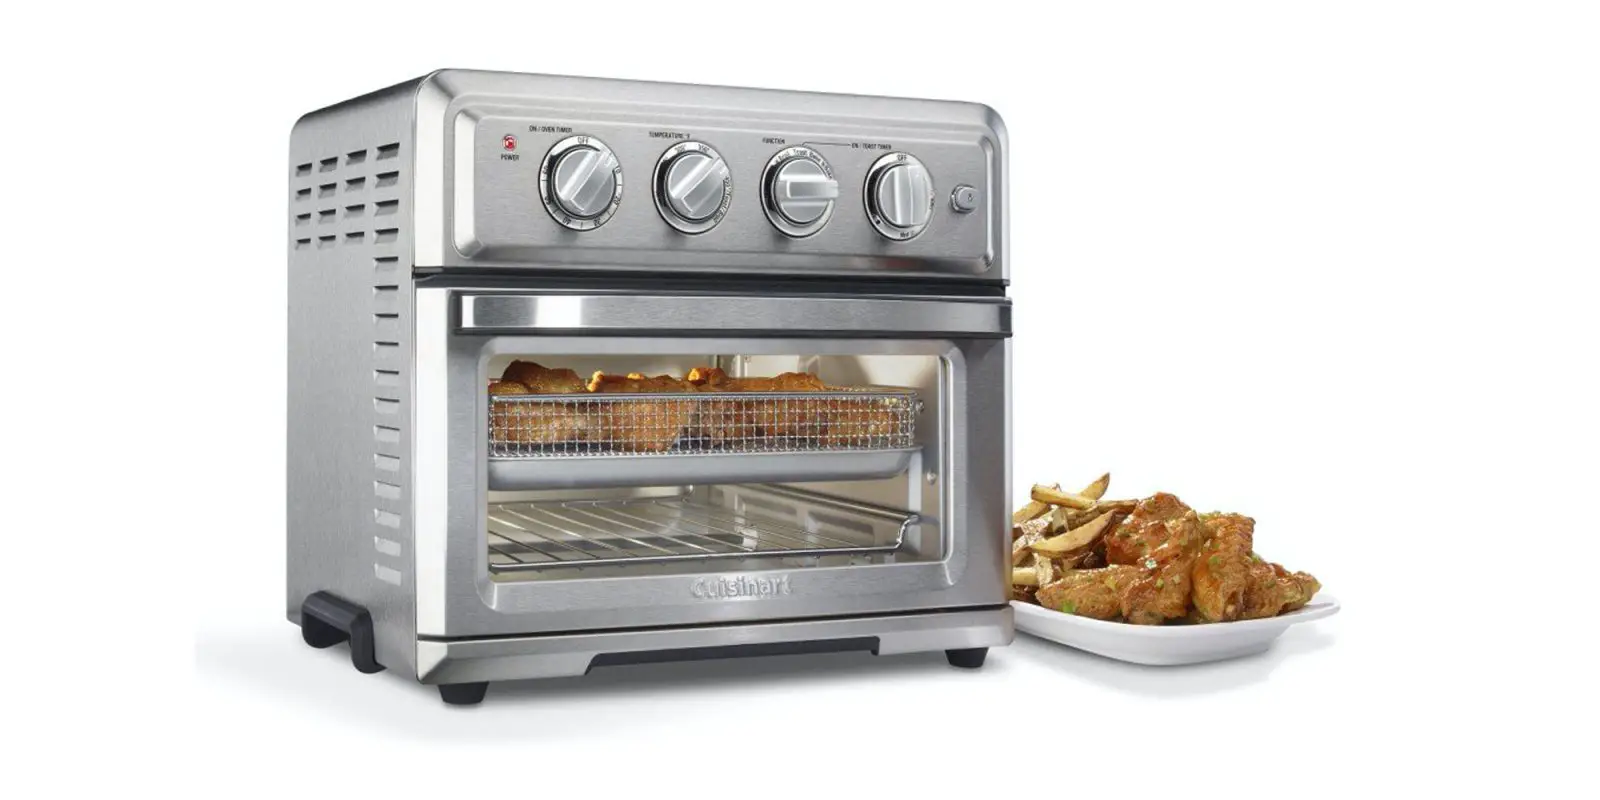 Cuisinart Digital Convection Toaster Oven Manual